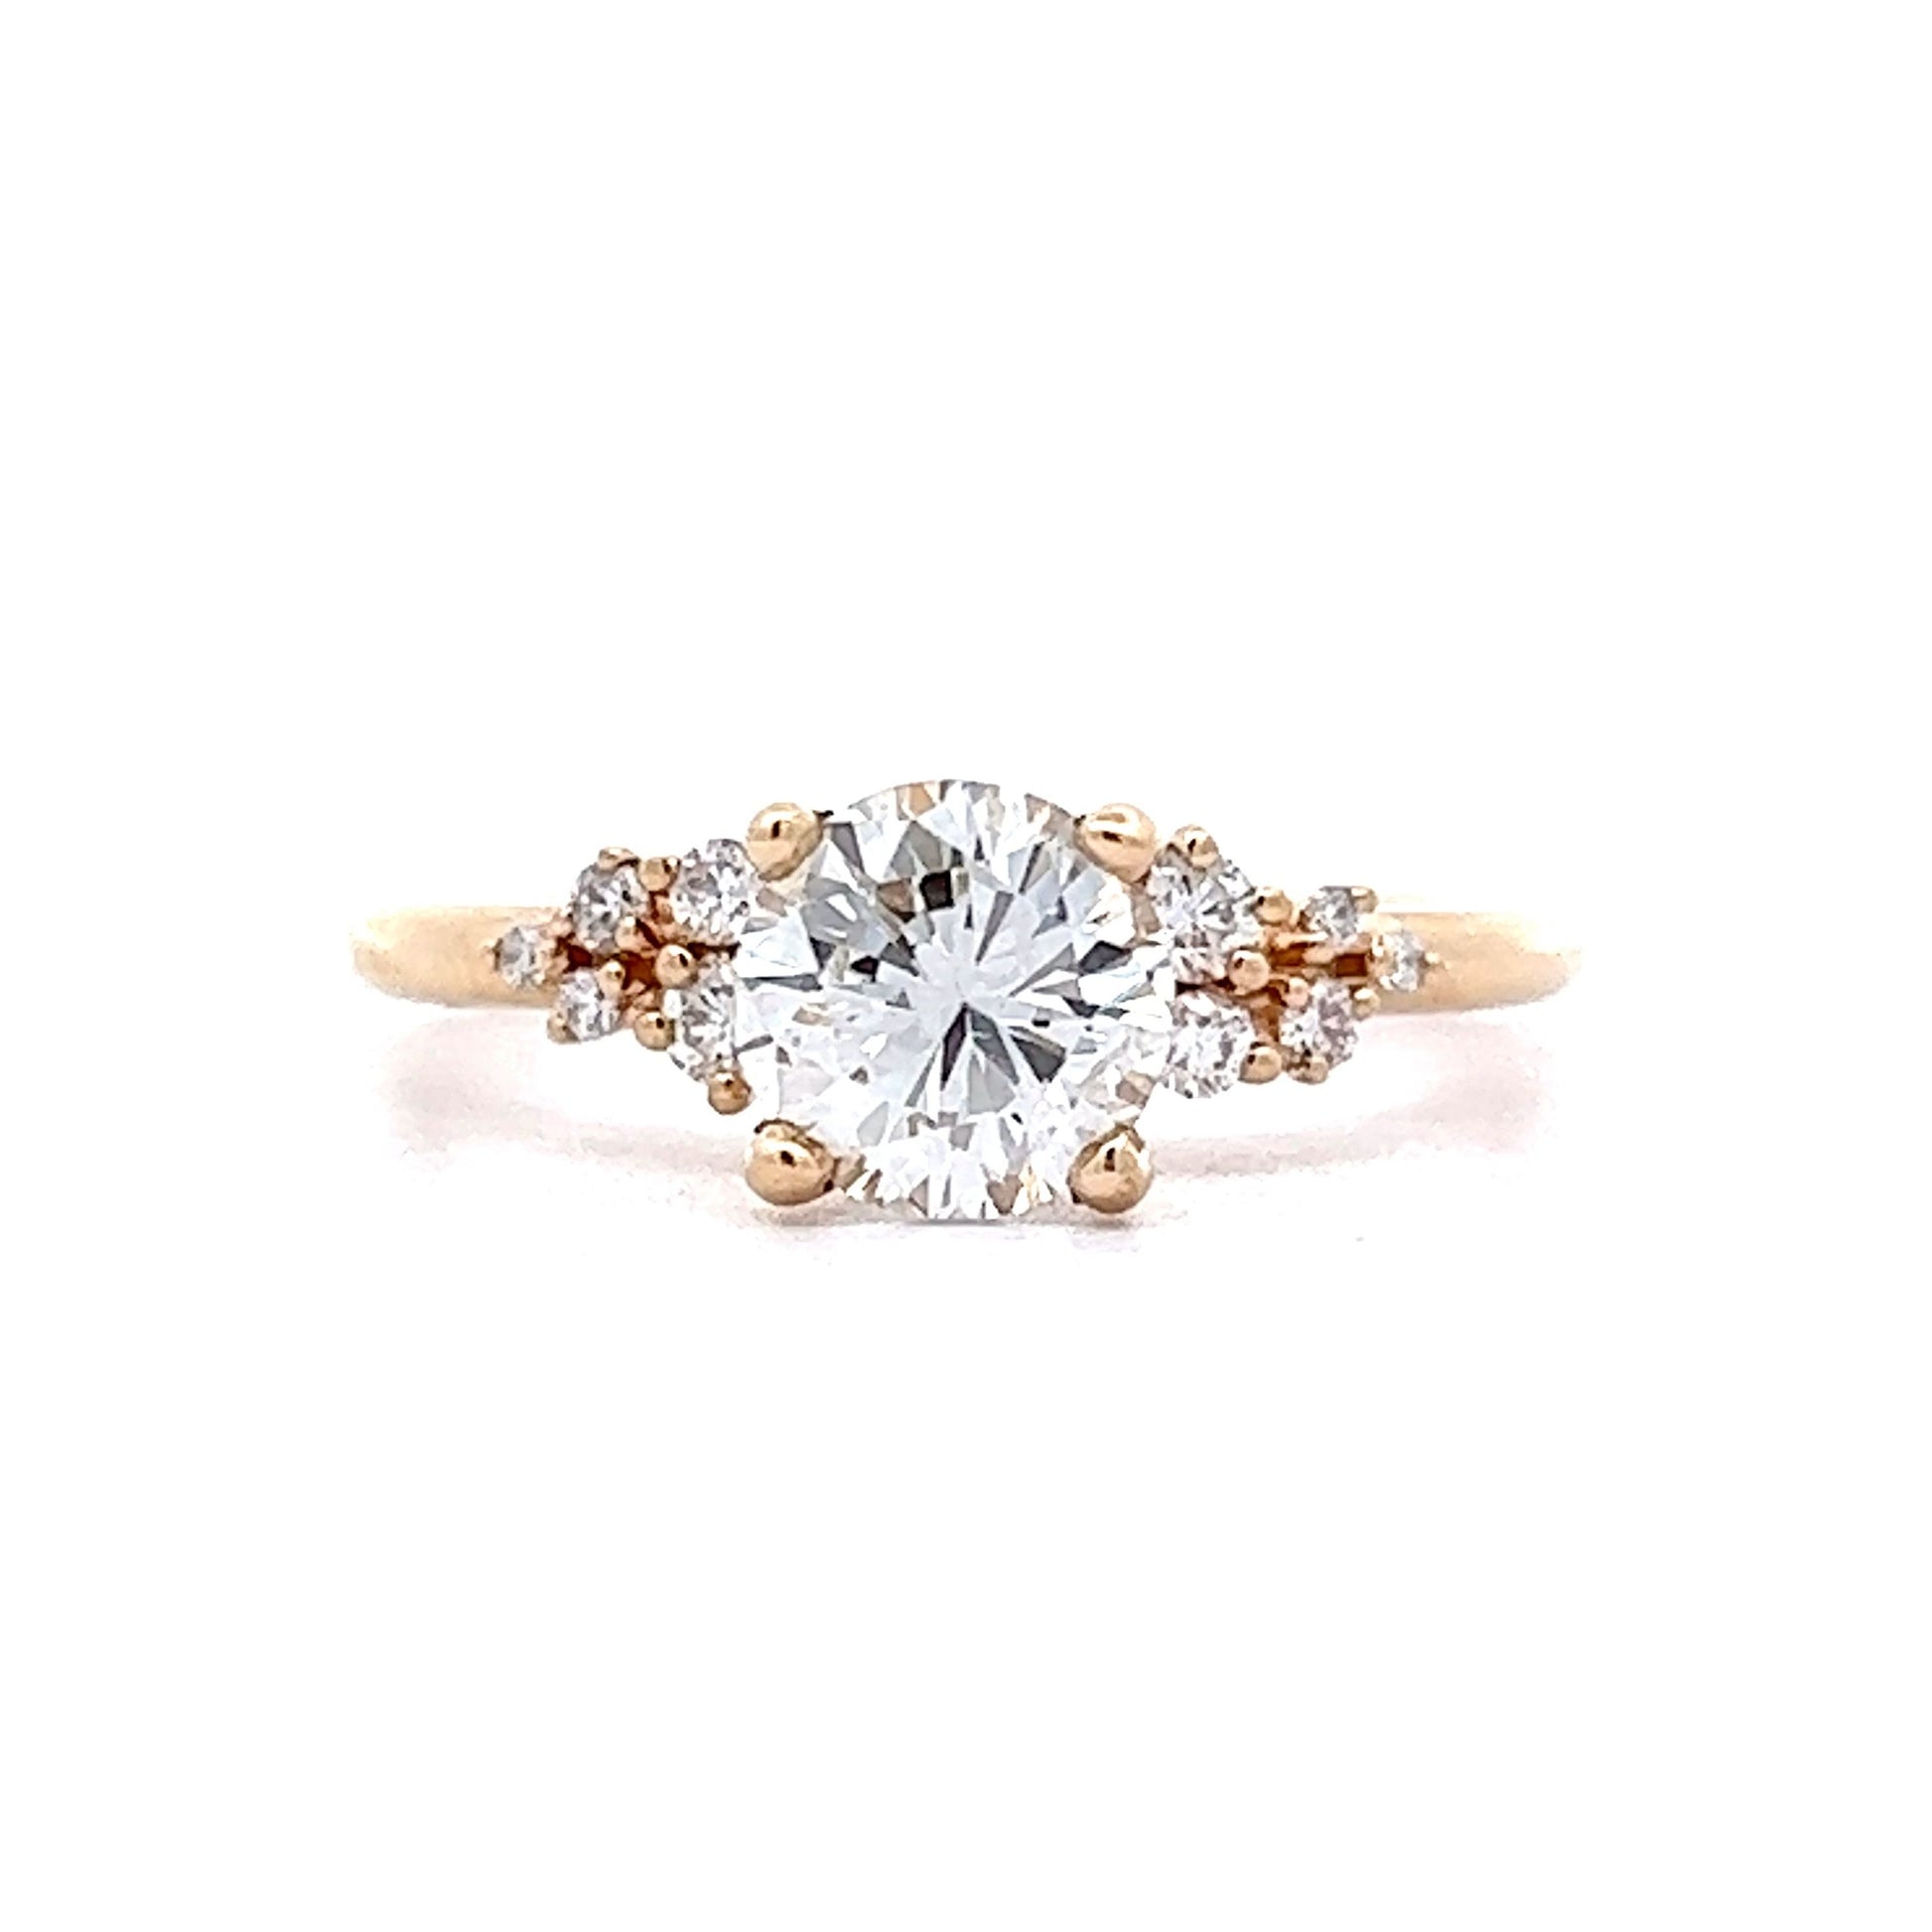 1.01 Solitaire Diamond Engagement Ring in 14k Yellow Gold